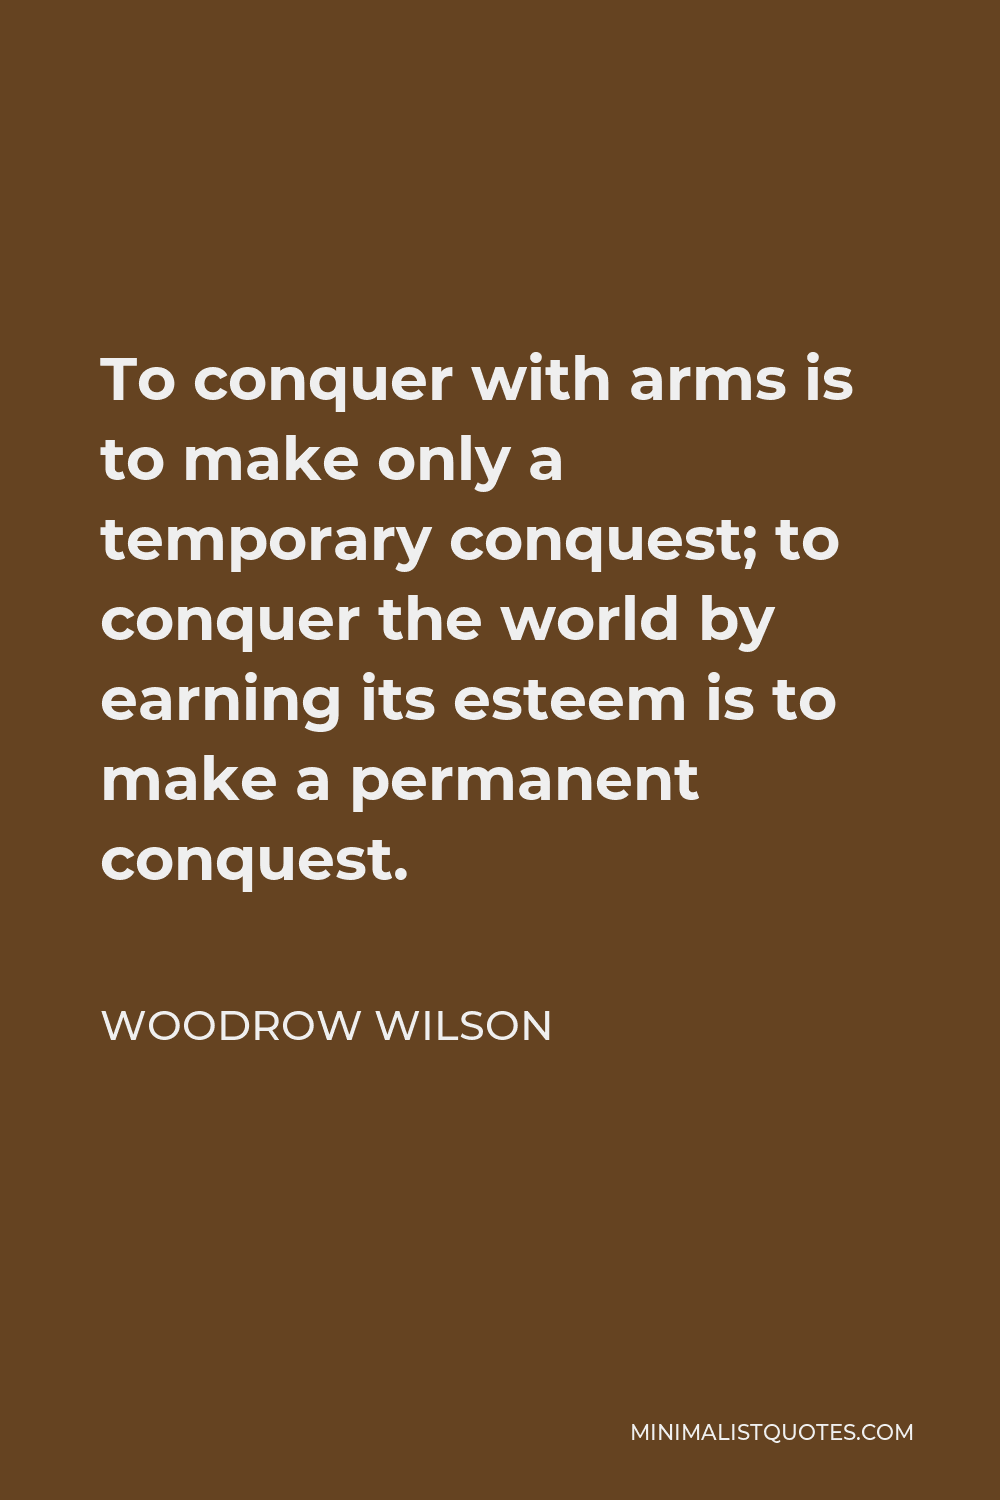 Woodrow Wilson Quote - To conquer with arms is to make only a temporary conquest; to conquer the world by earning its esteem is to make a permanent conquest.